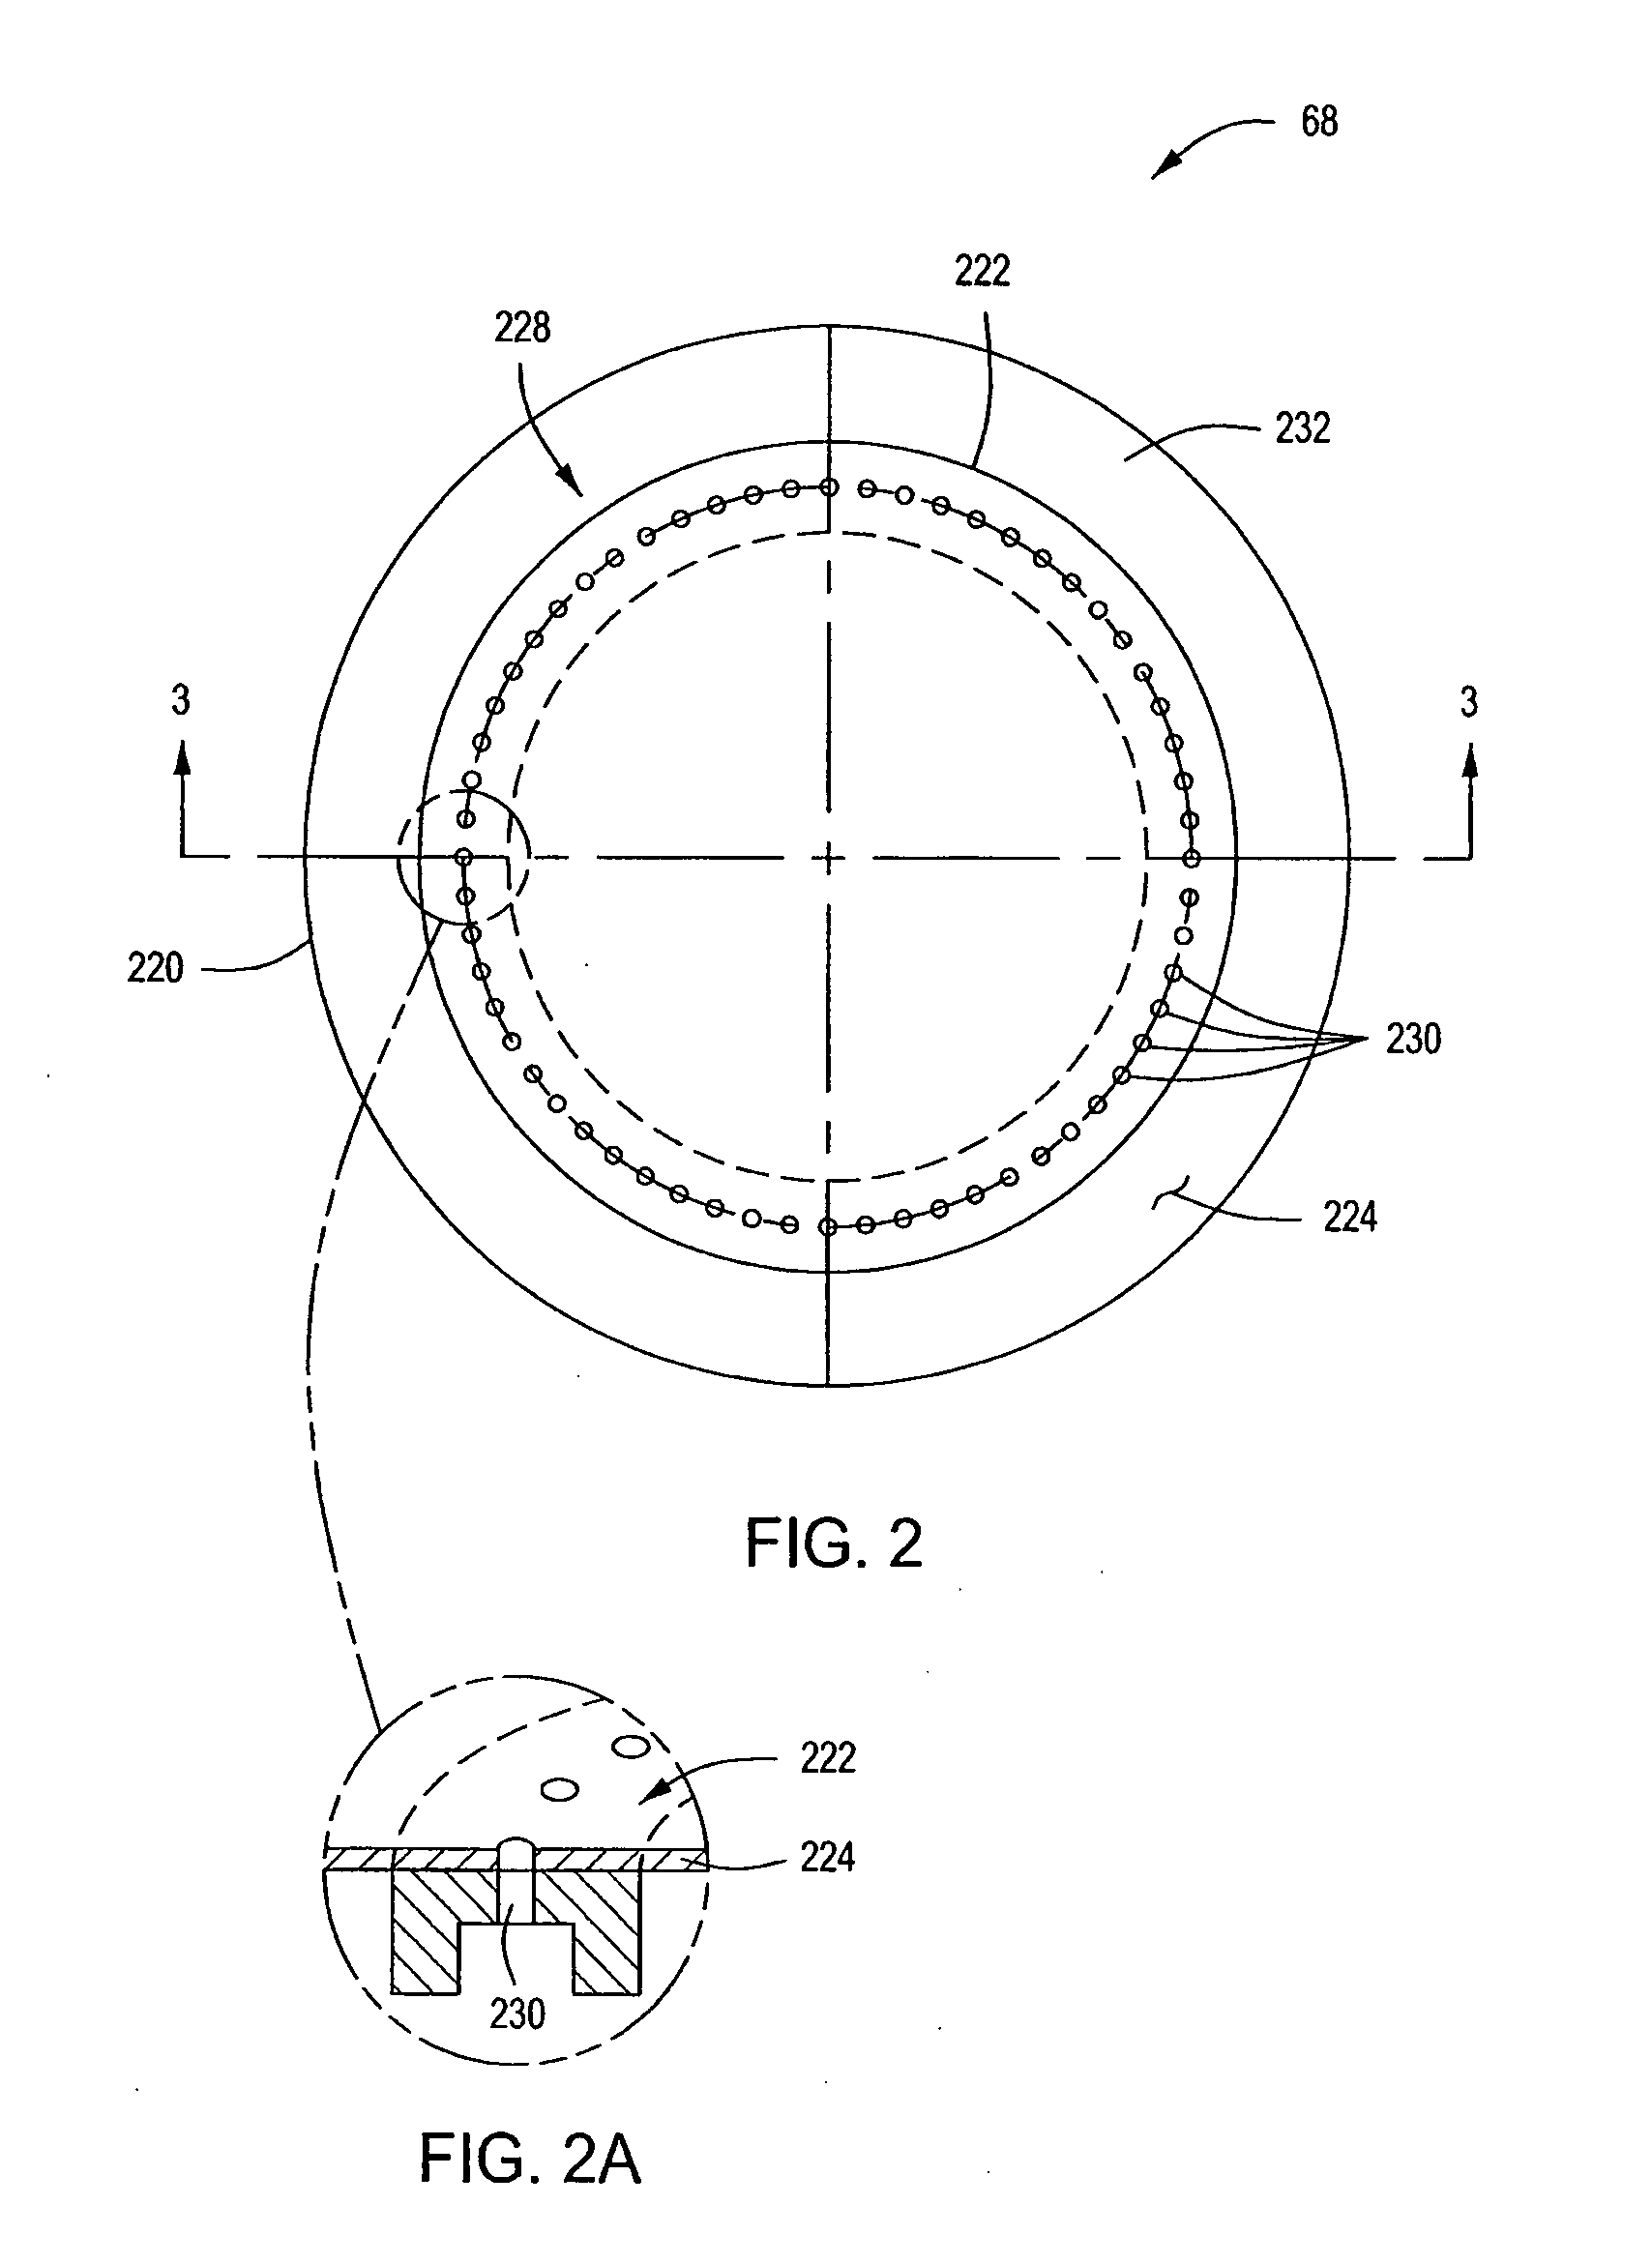 Method and apparatus for providing an electrostatic chuck with reduced plasma penetration and arcing